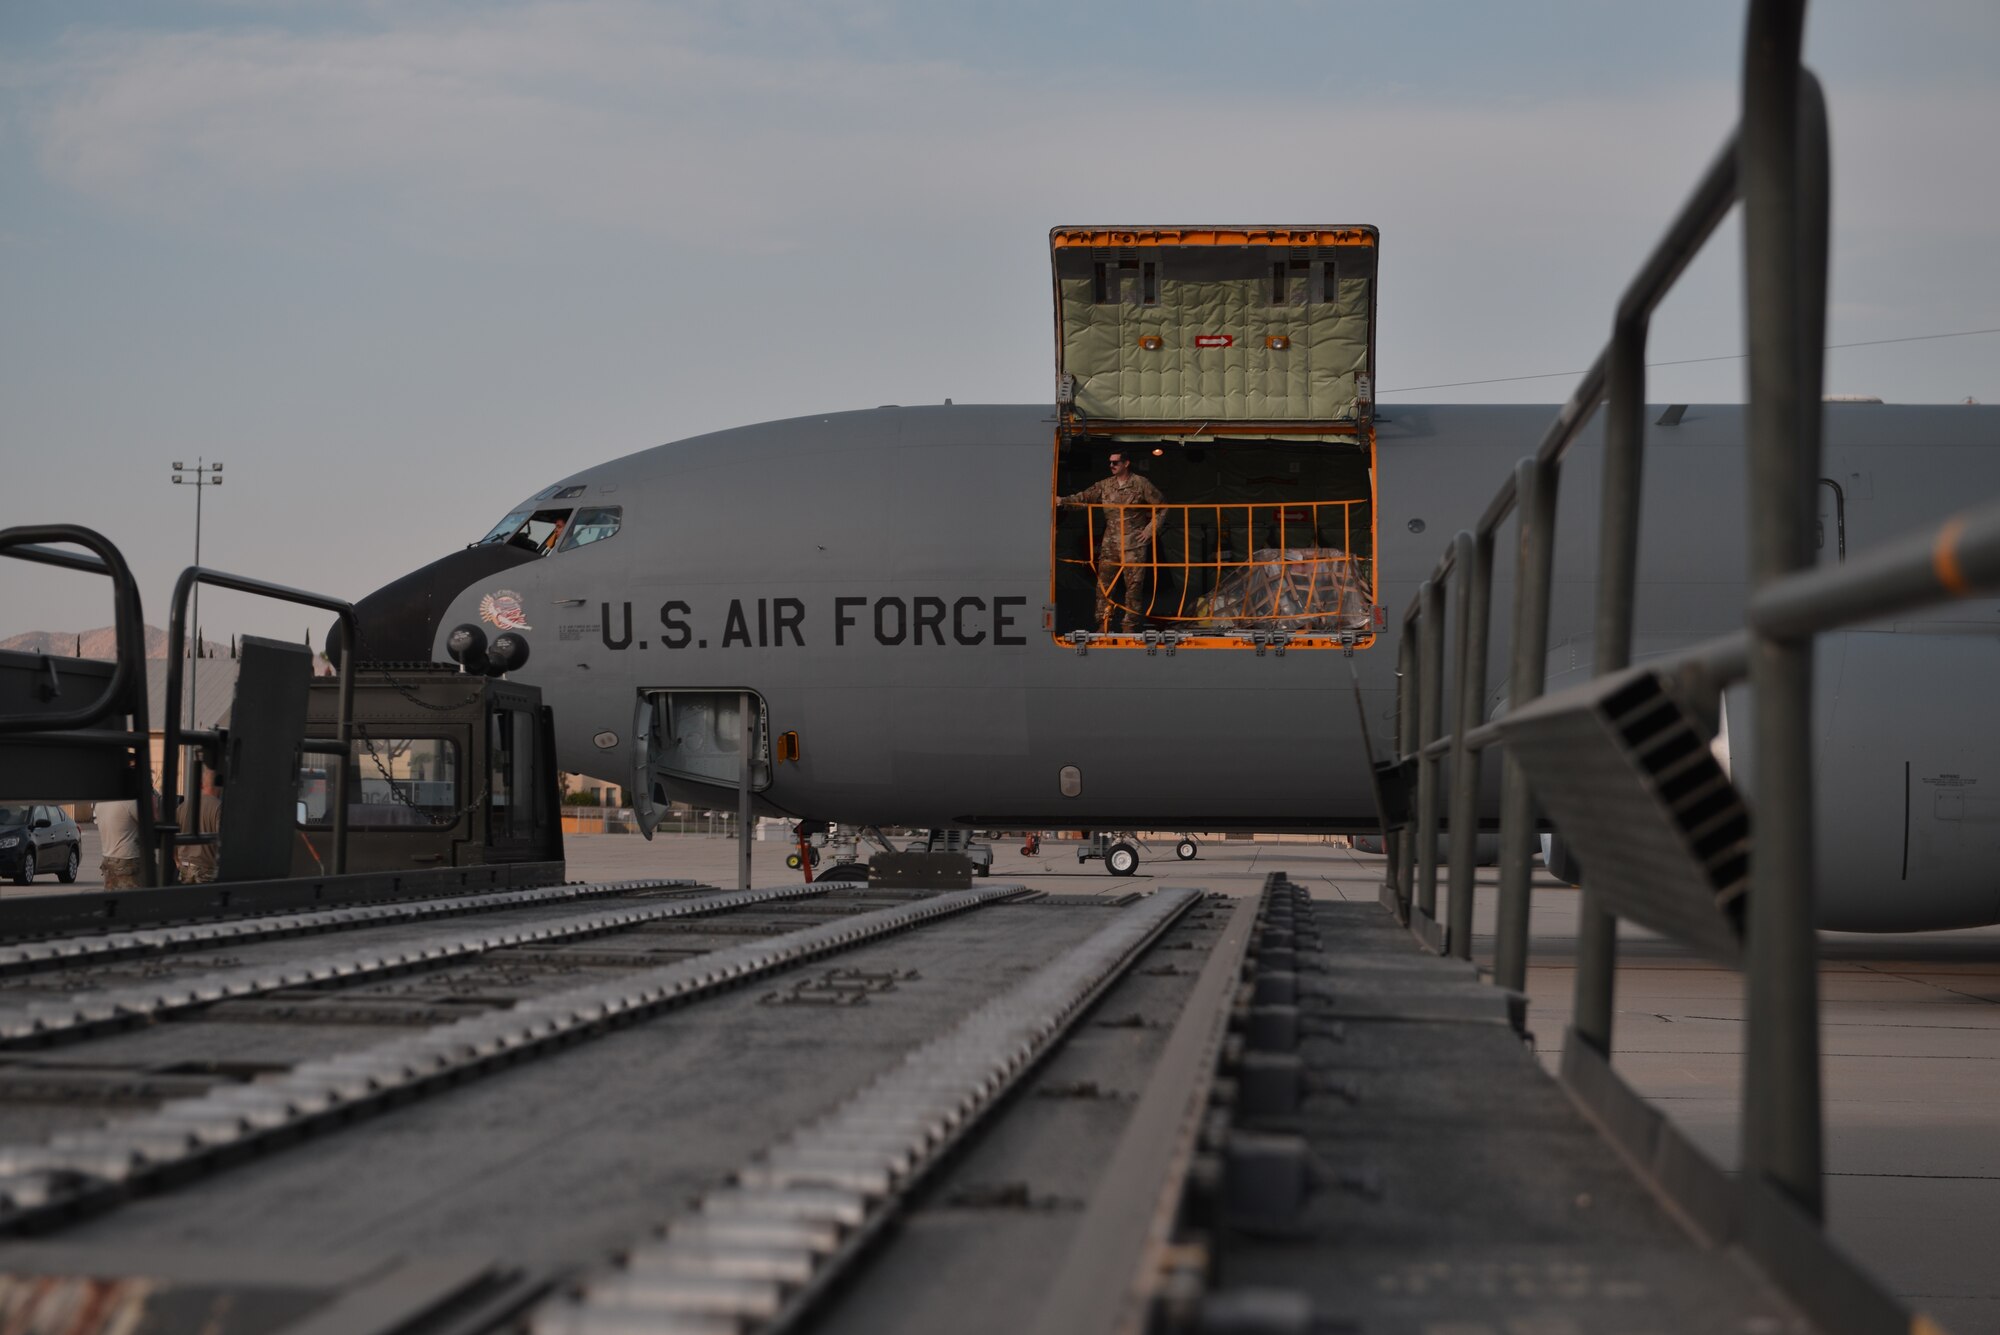 A KC-135 Stratotanker boom operator from Fairchild Air Force Base, Washington, prepares to unload cargo at March Air Reserve Base, California, Sept. 4, 2019. Fairchild Airmen will continue their Global Reach mission at March ARB during Air Mobility Command’s premier exercise Mobility Guardian 2019, currently hosted at Team Fairchild. (U.S. Air Force photo by Airman 1st Class Ryan Gomez)